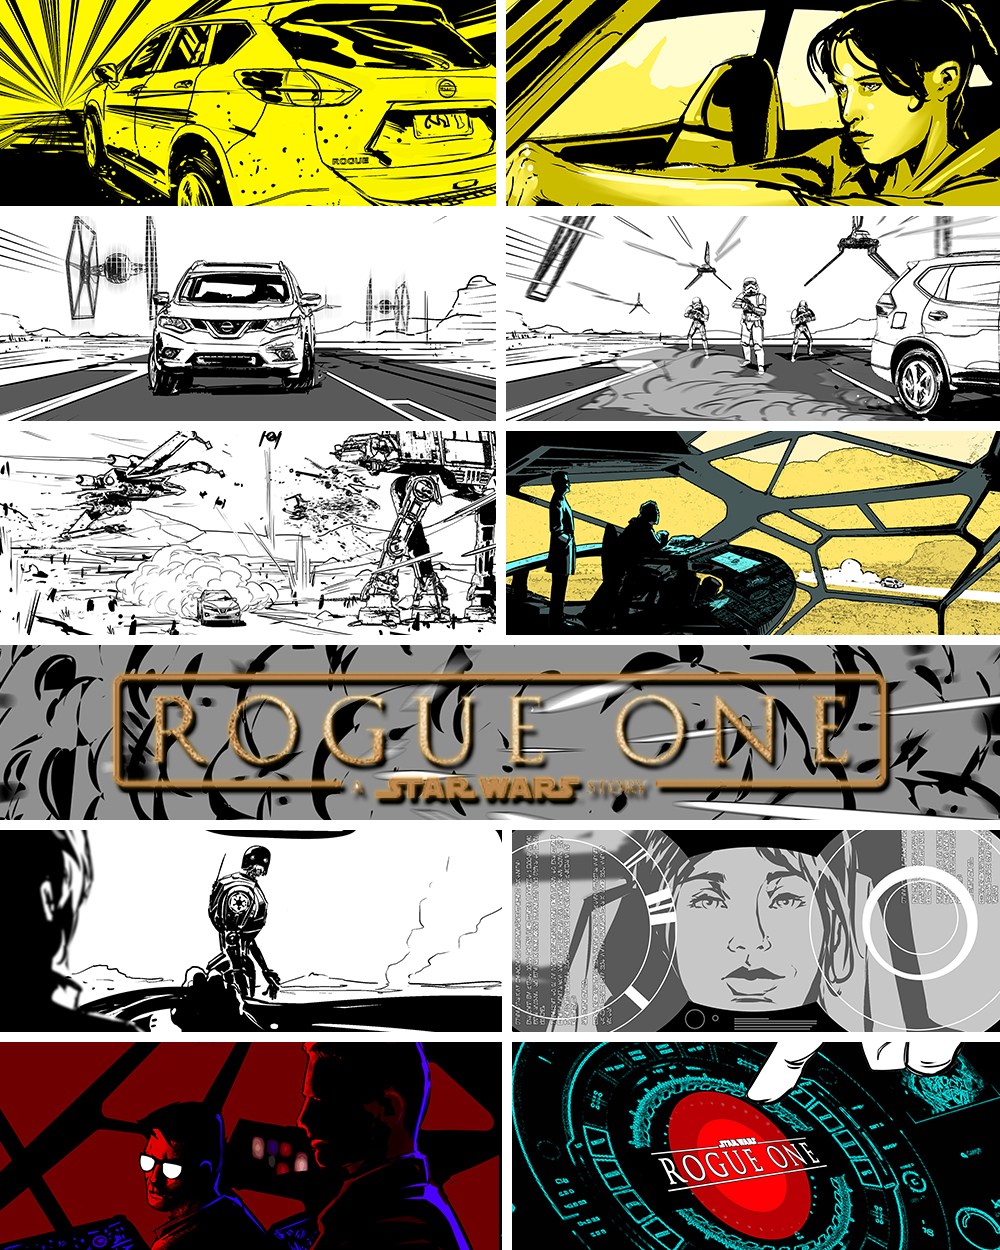 Nissan Rogue One